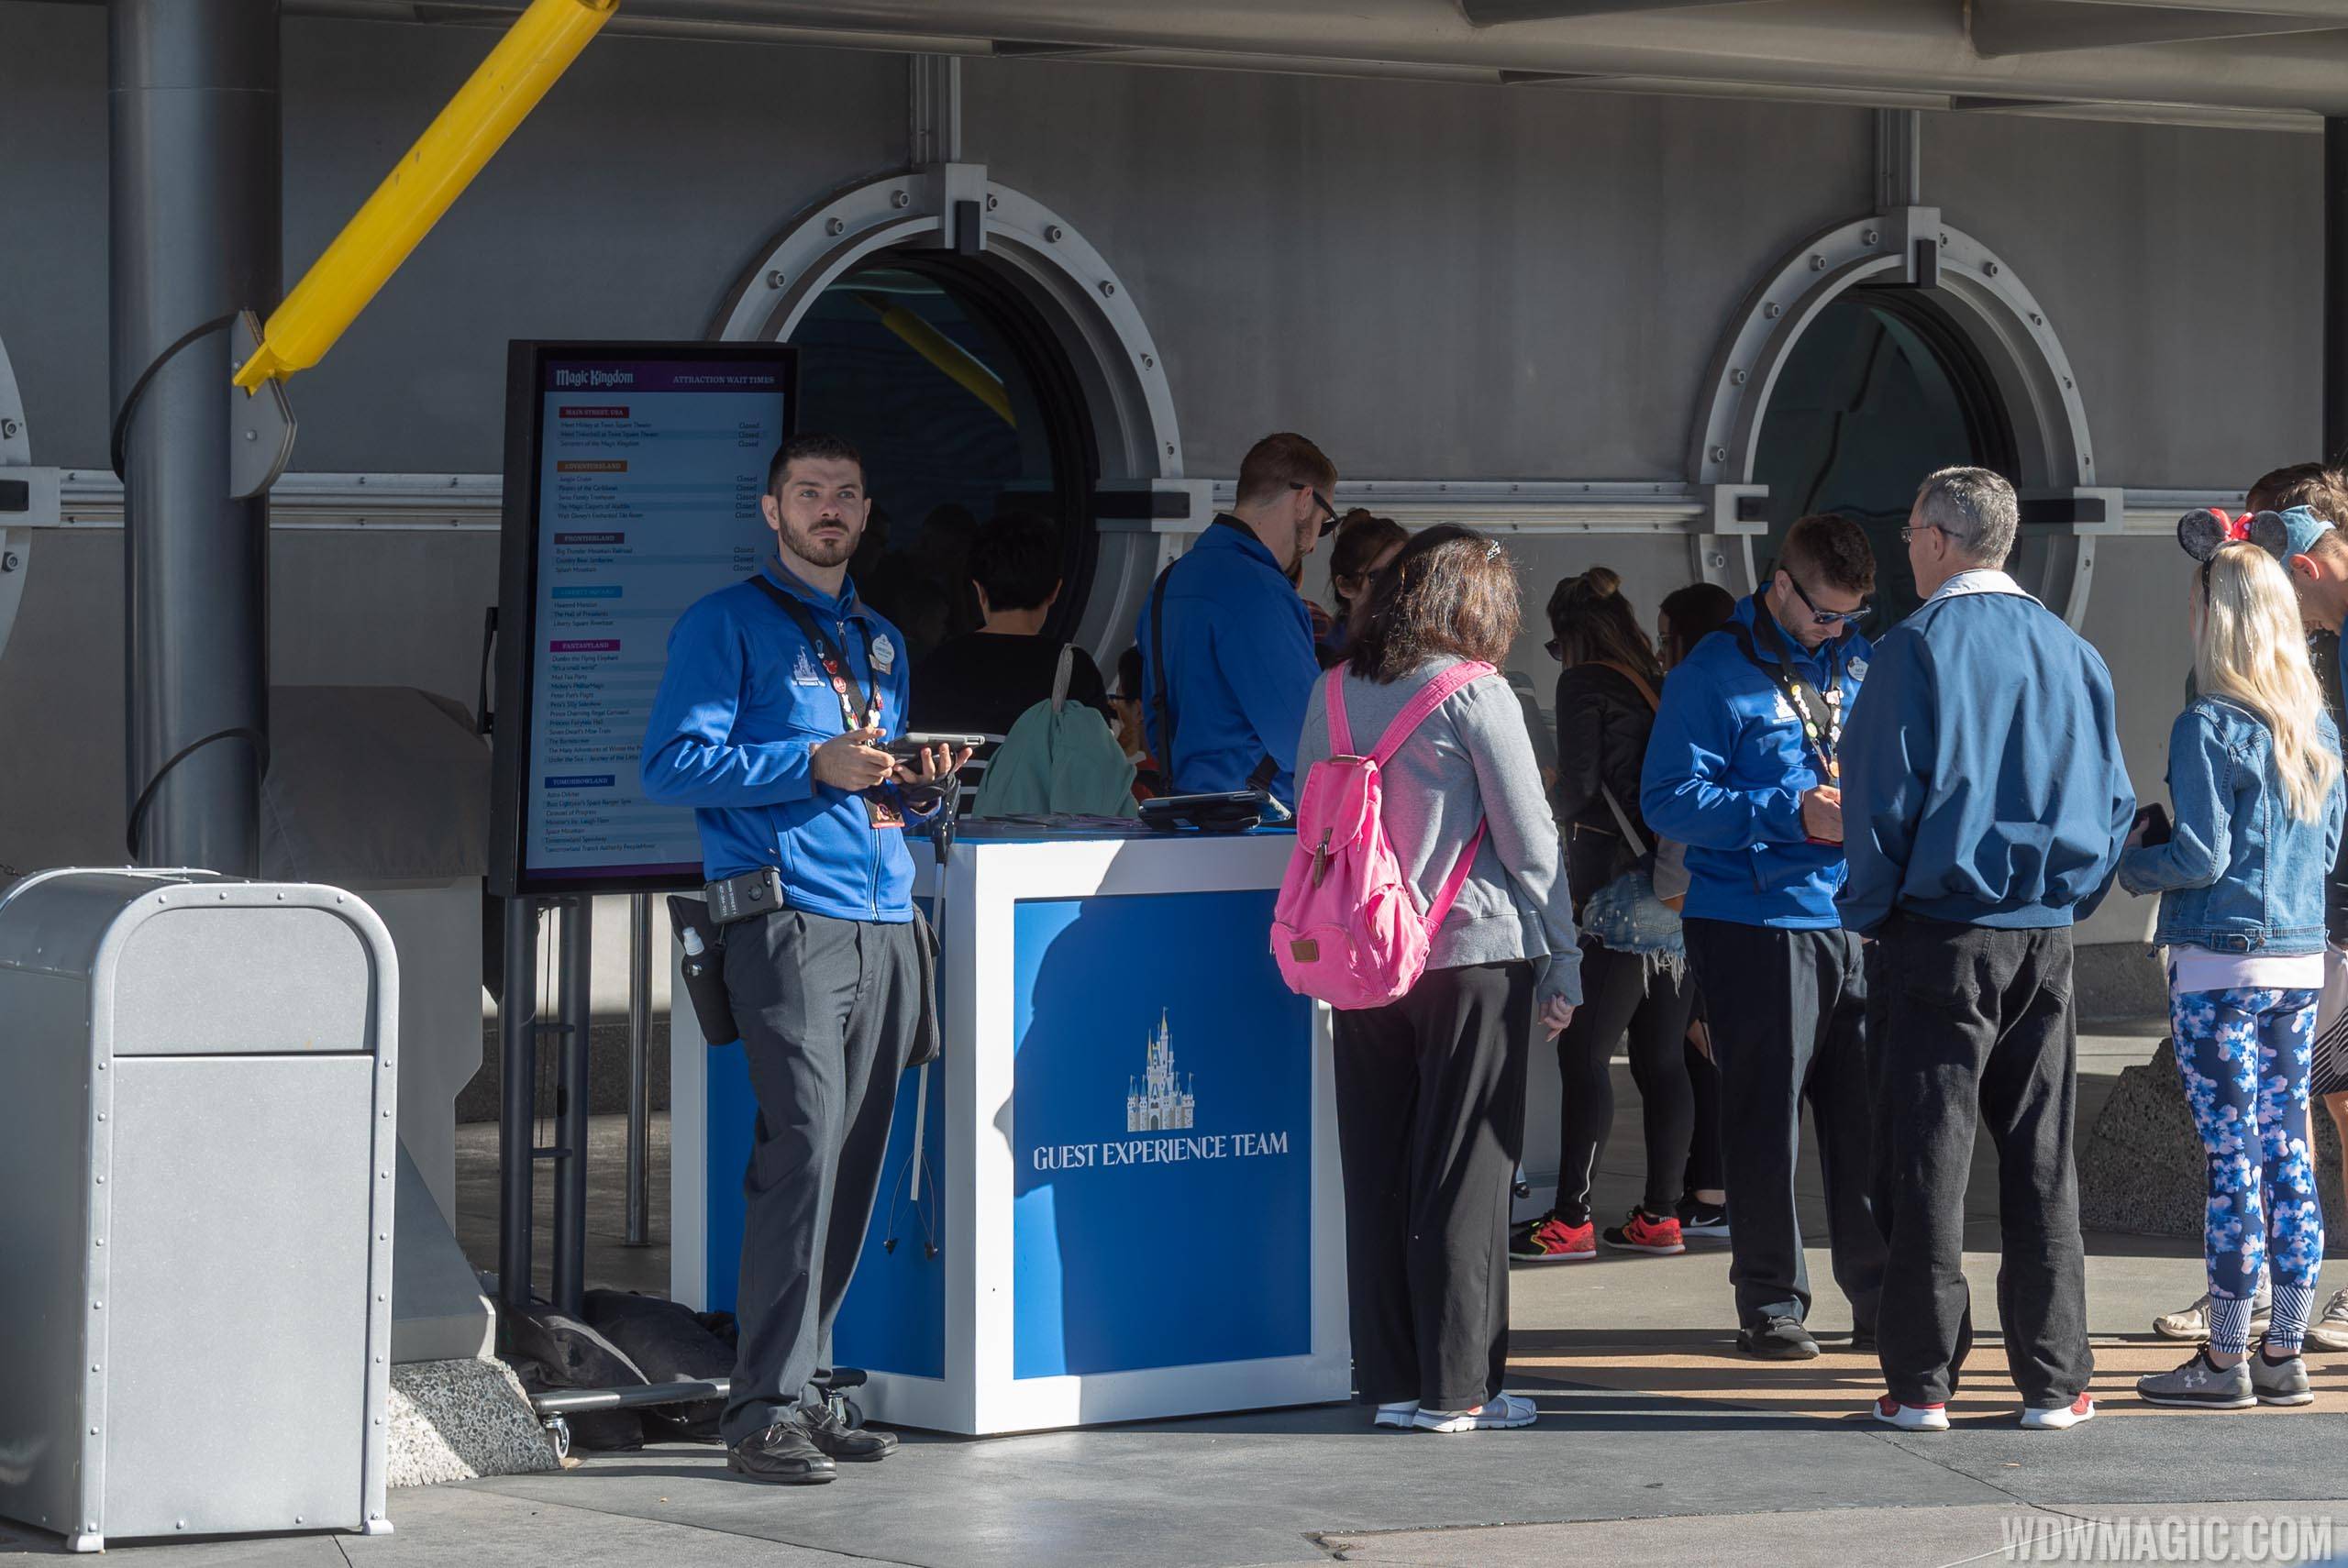 Guest Experience Team station in Tomorrowland